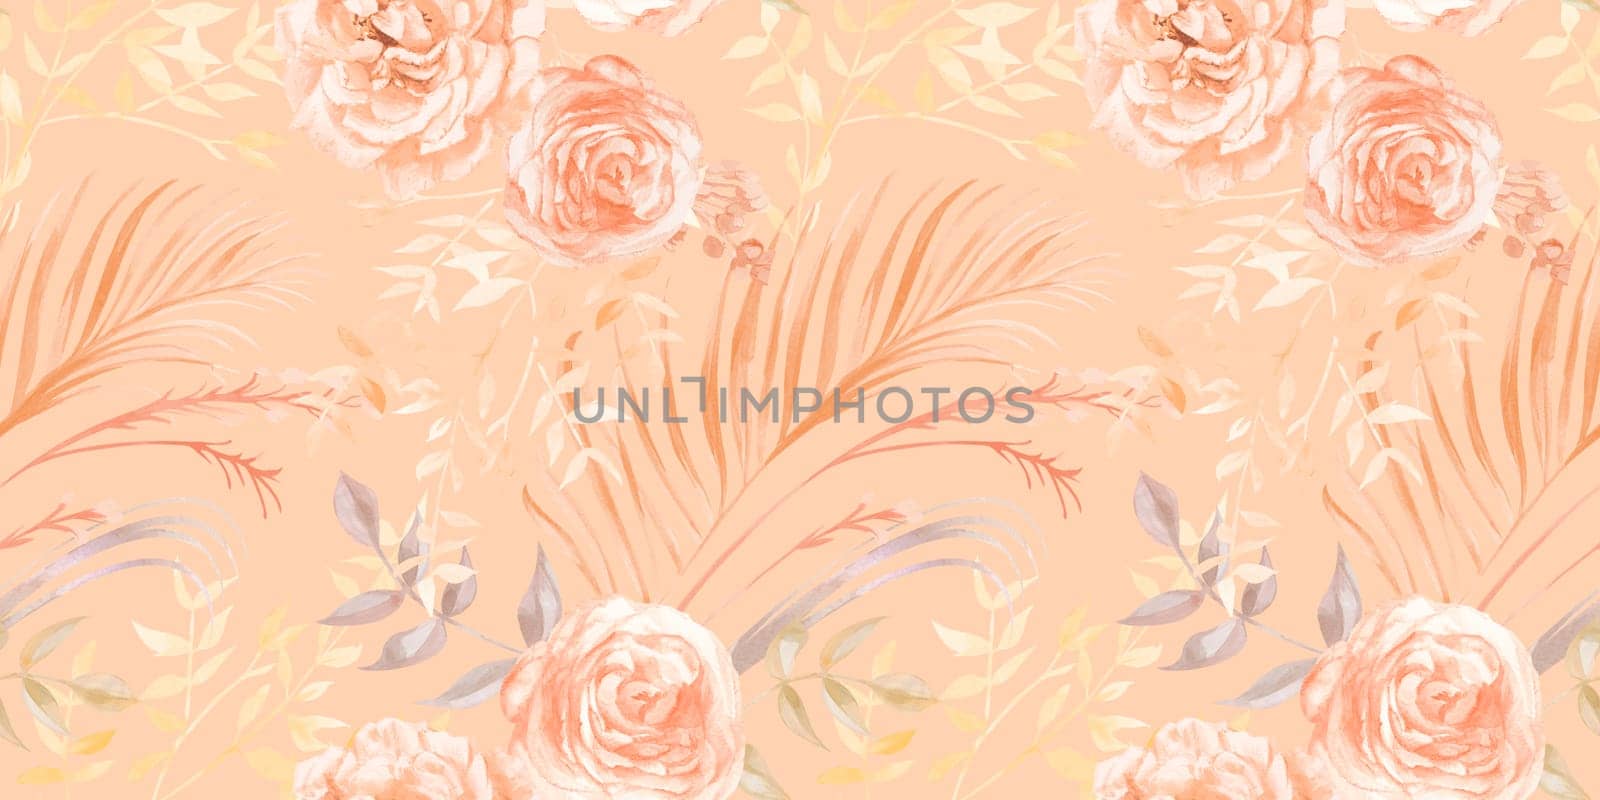 Monochrome pattern with watercolor flowers and twigs